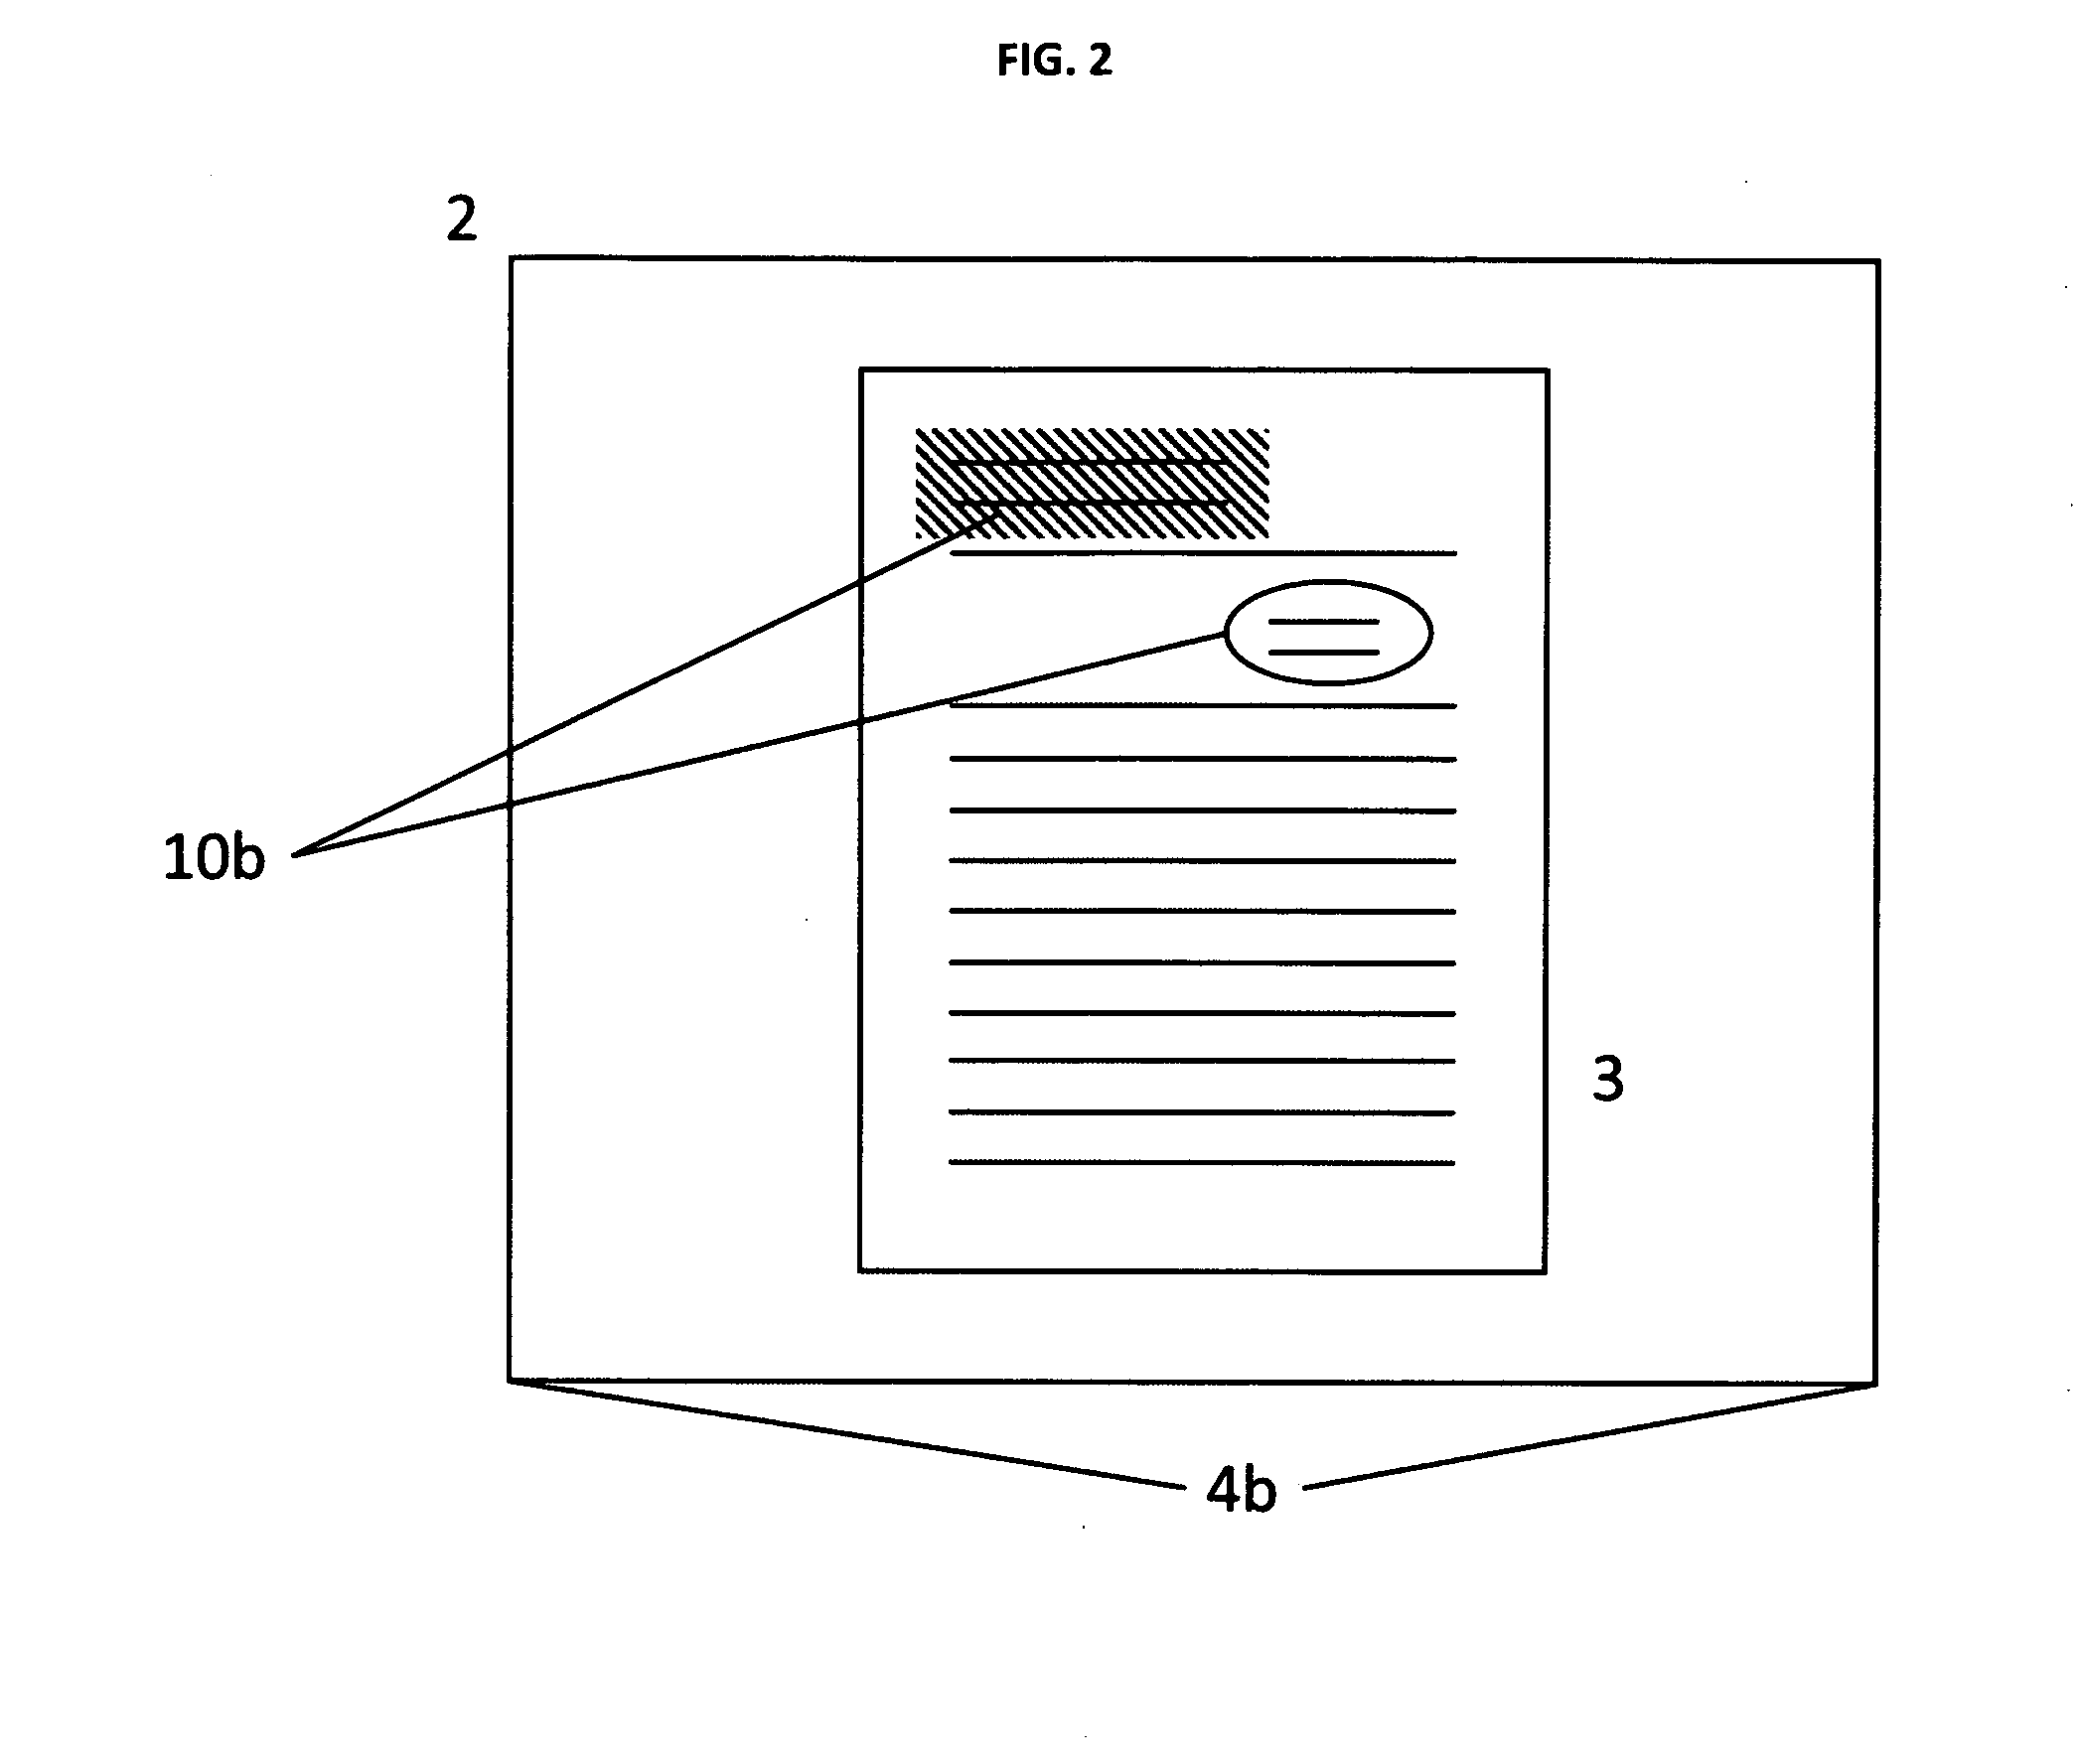 Method and Computer-Readable Medium for Presenting Displayable Content to an Audience